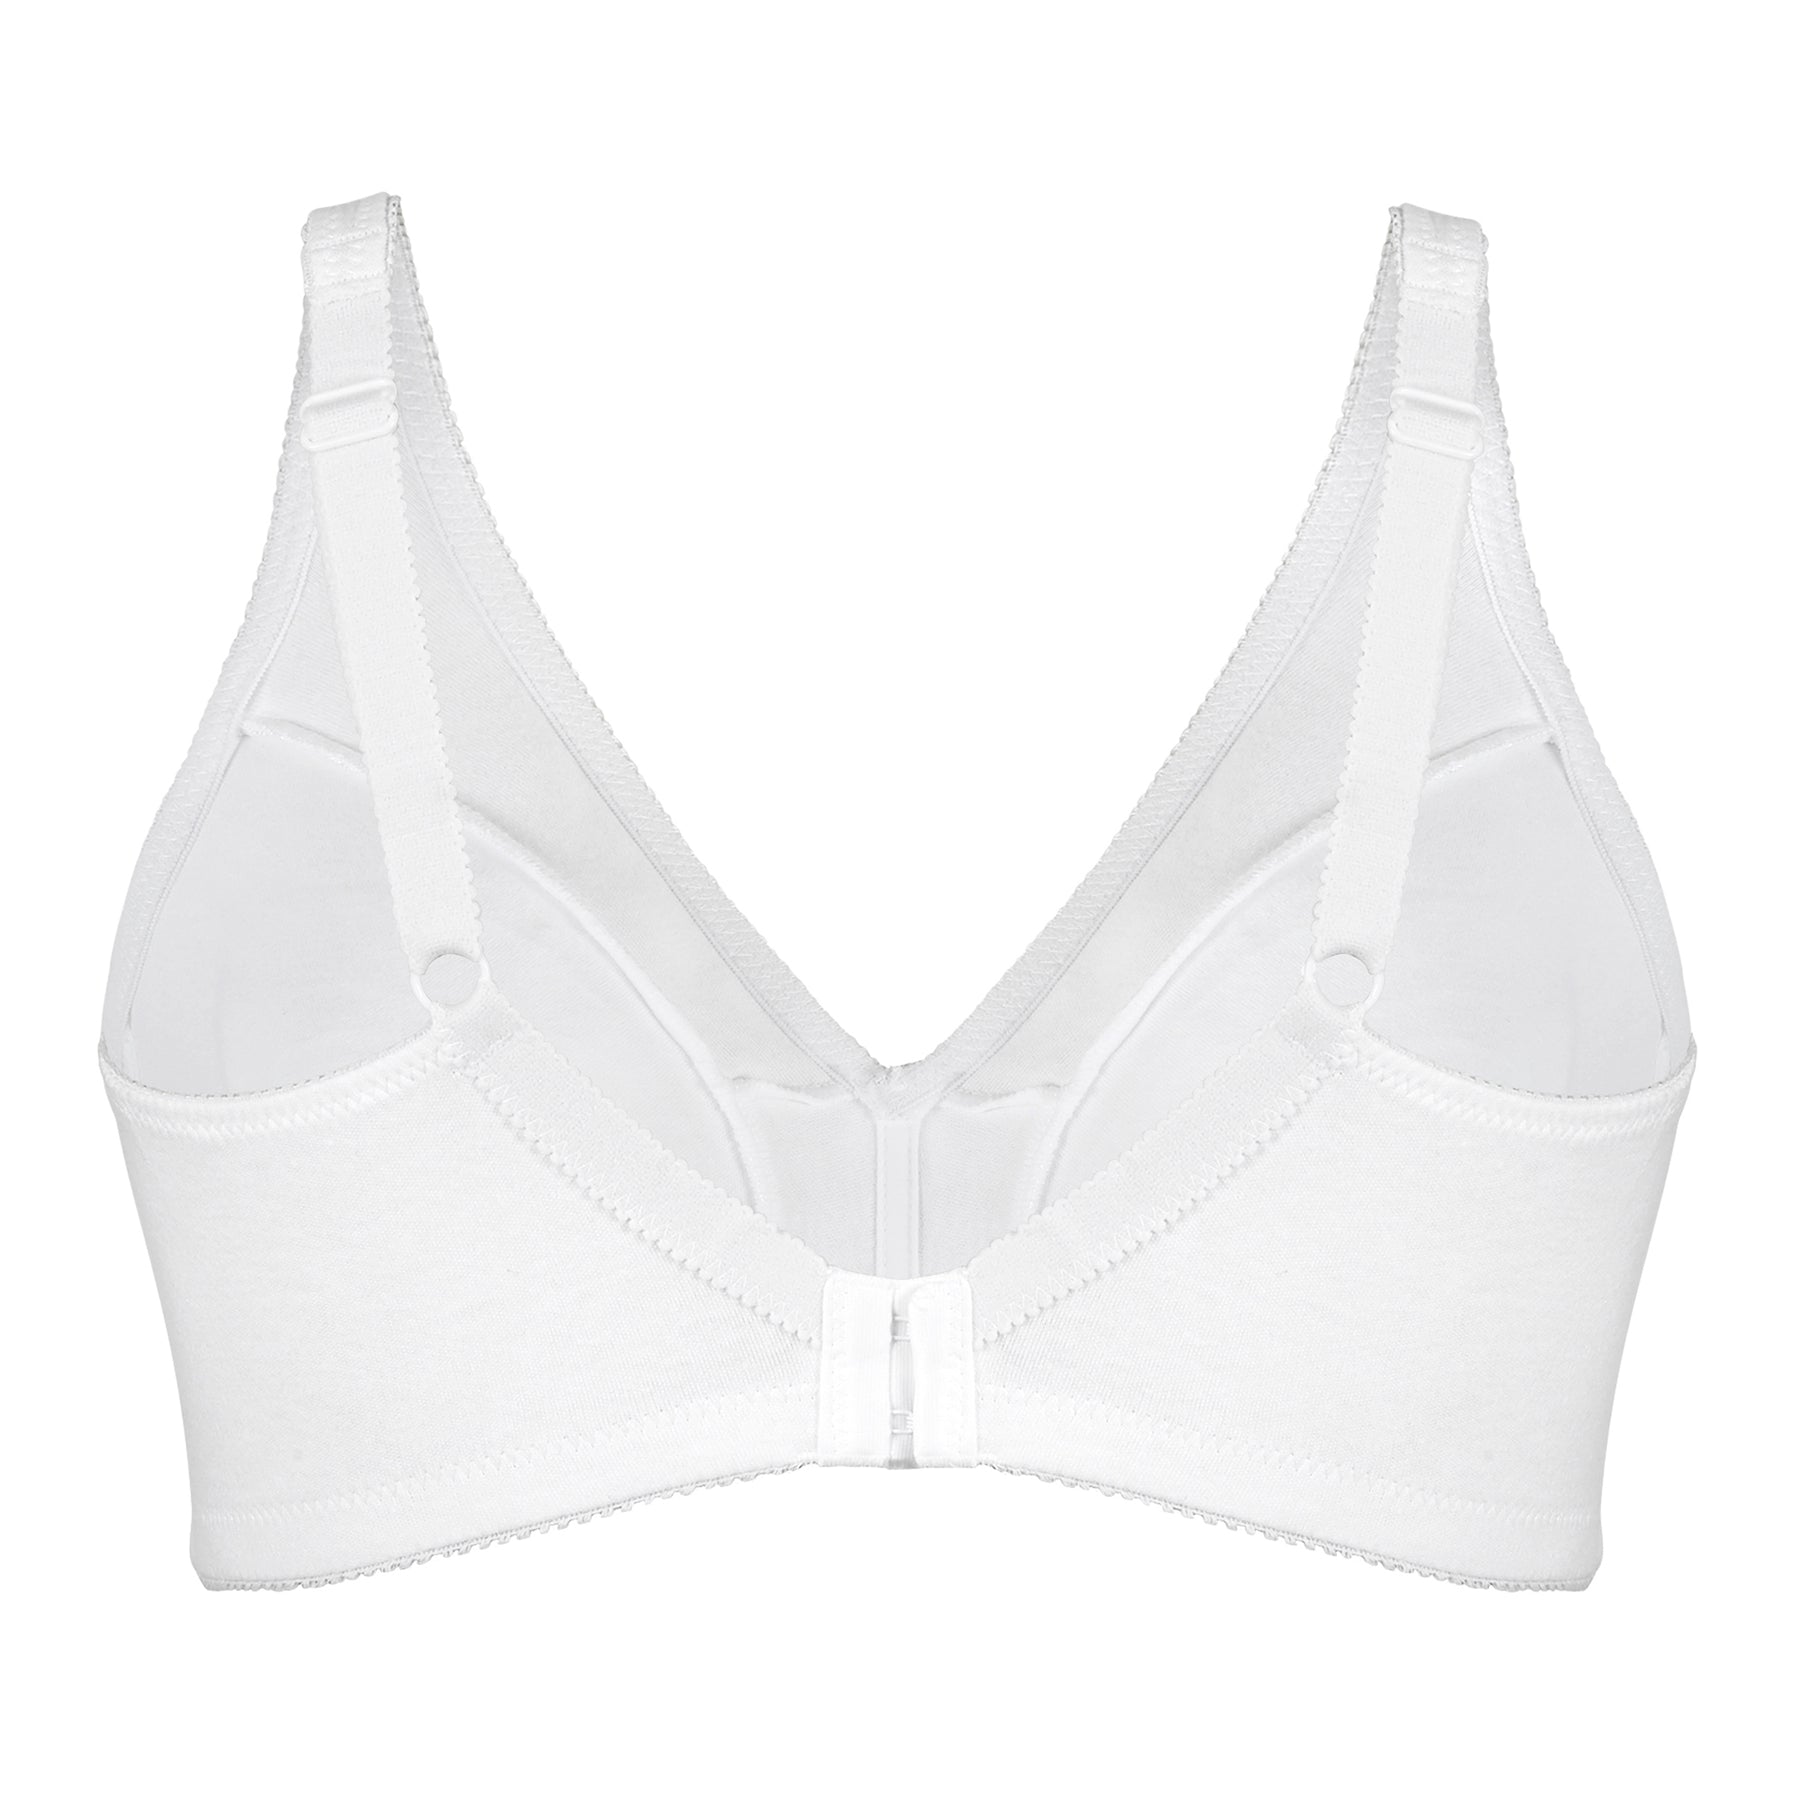 An unlined everyday bra from Bestform is ready for you to try